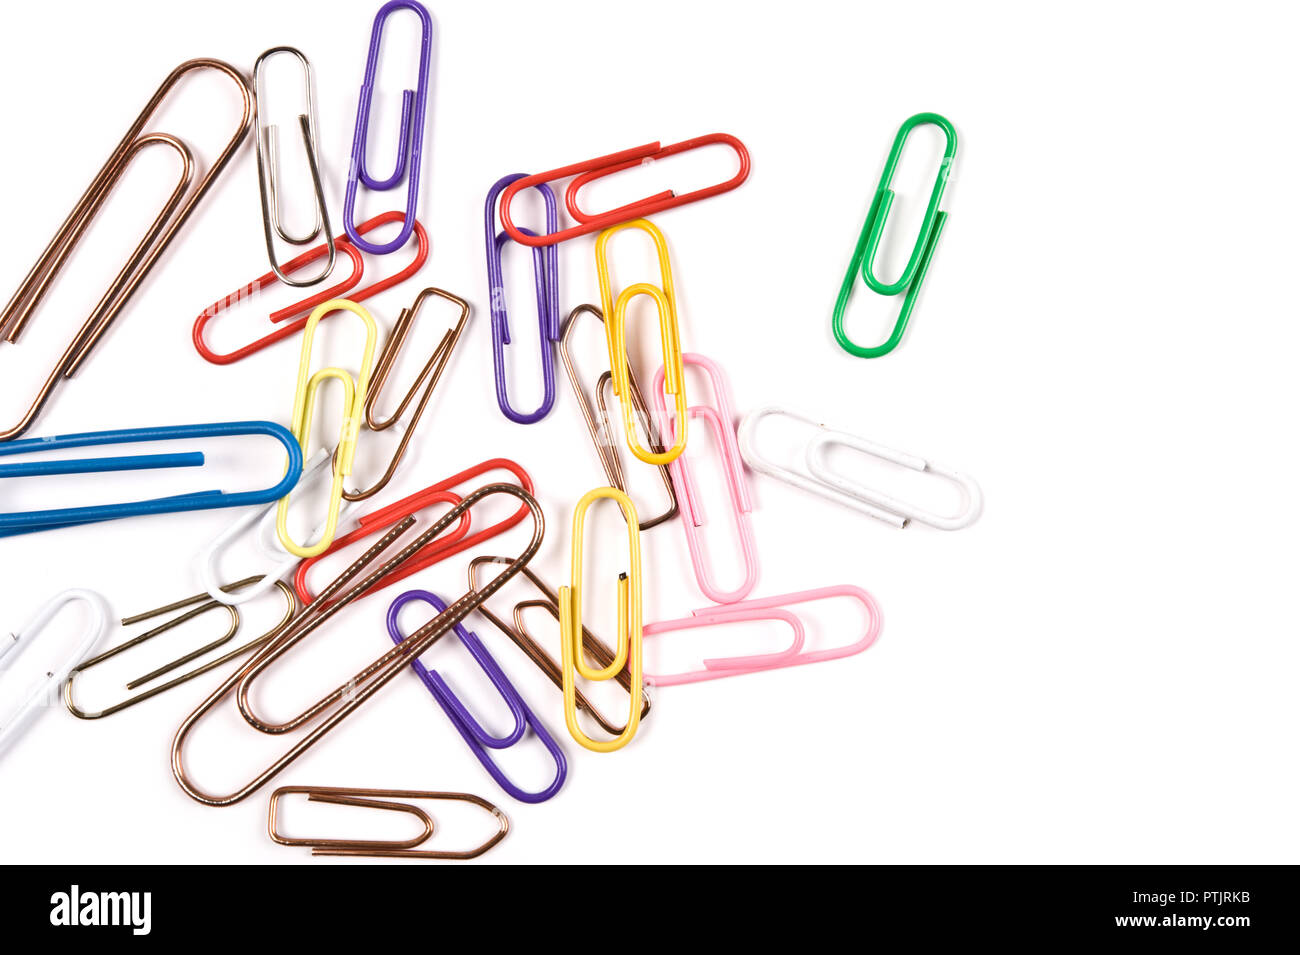 Close-up of multi-colored paper clips on a white background. Stock Photo